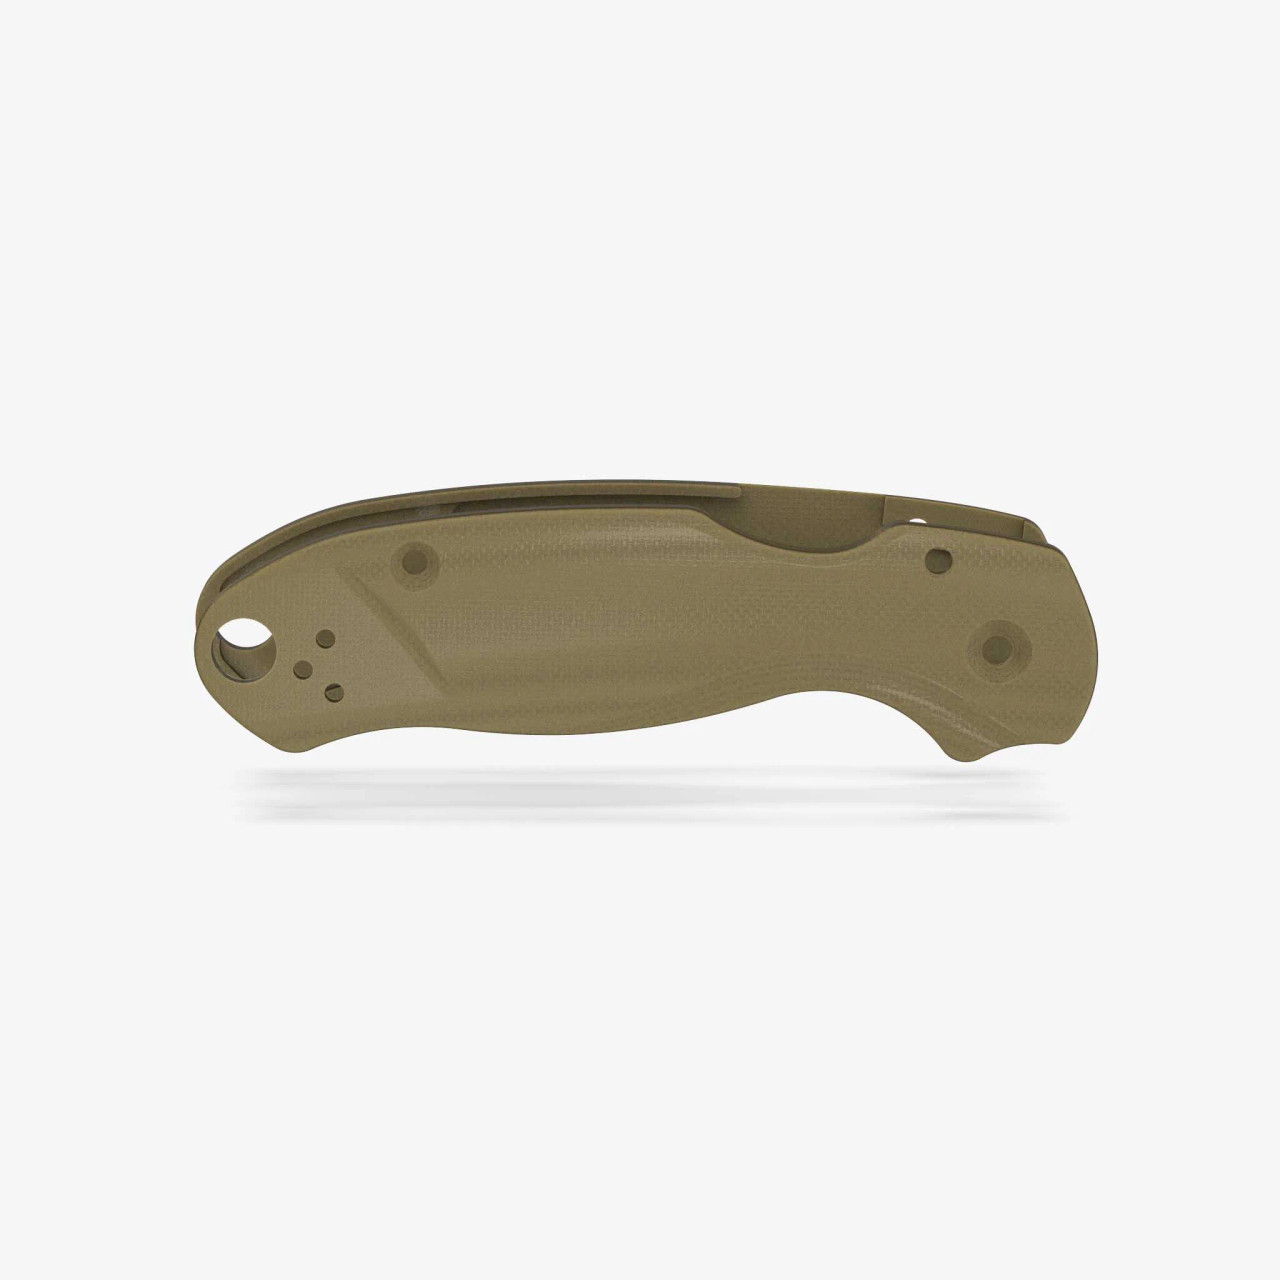 Flytanium Lotus OD Green G-10 Scales - for Spyderco Paramilitary 3